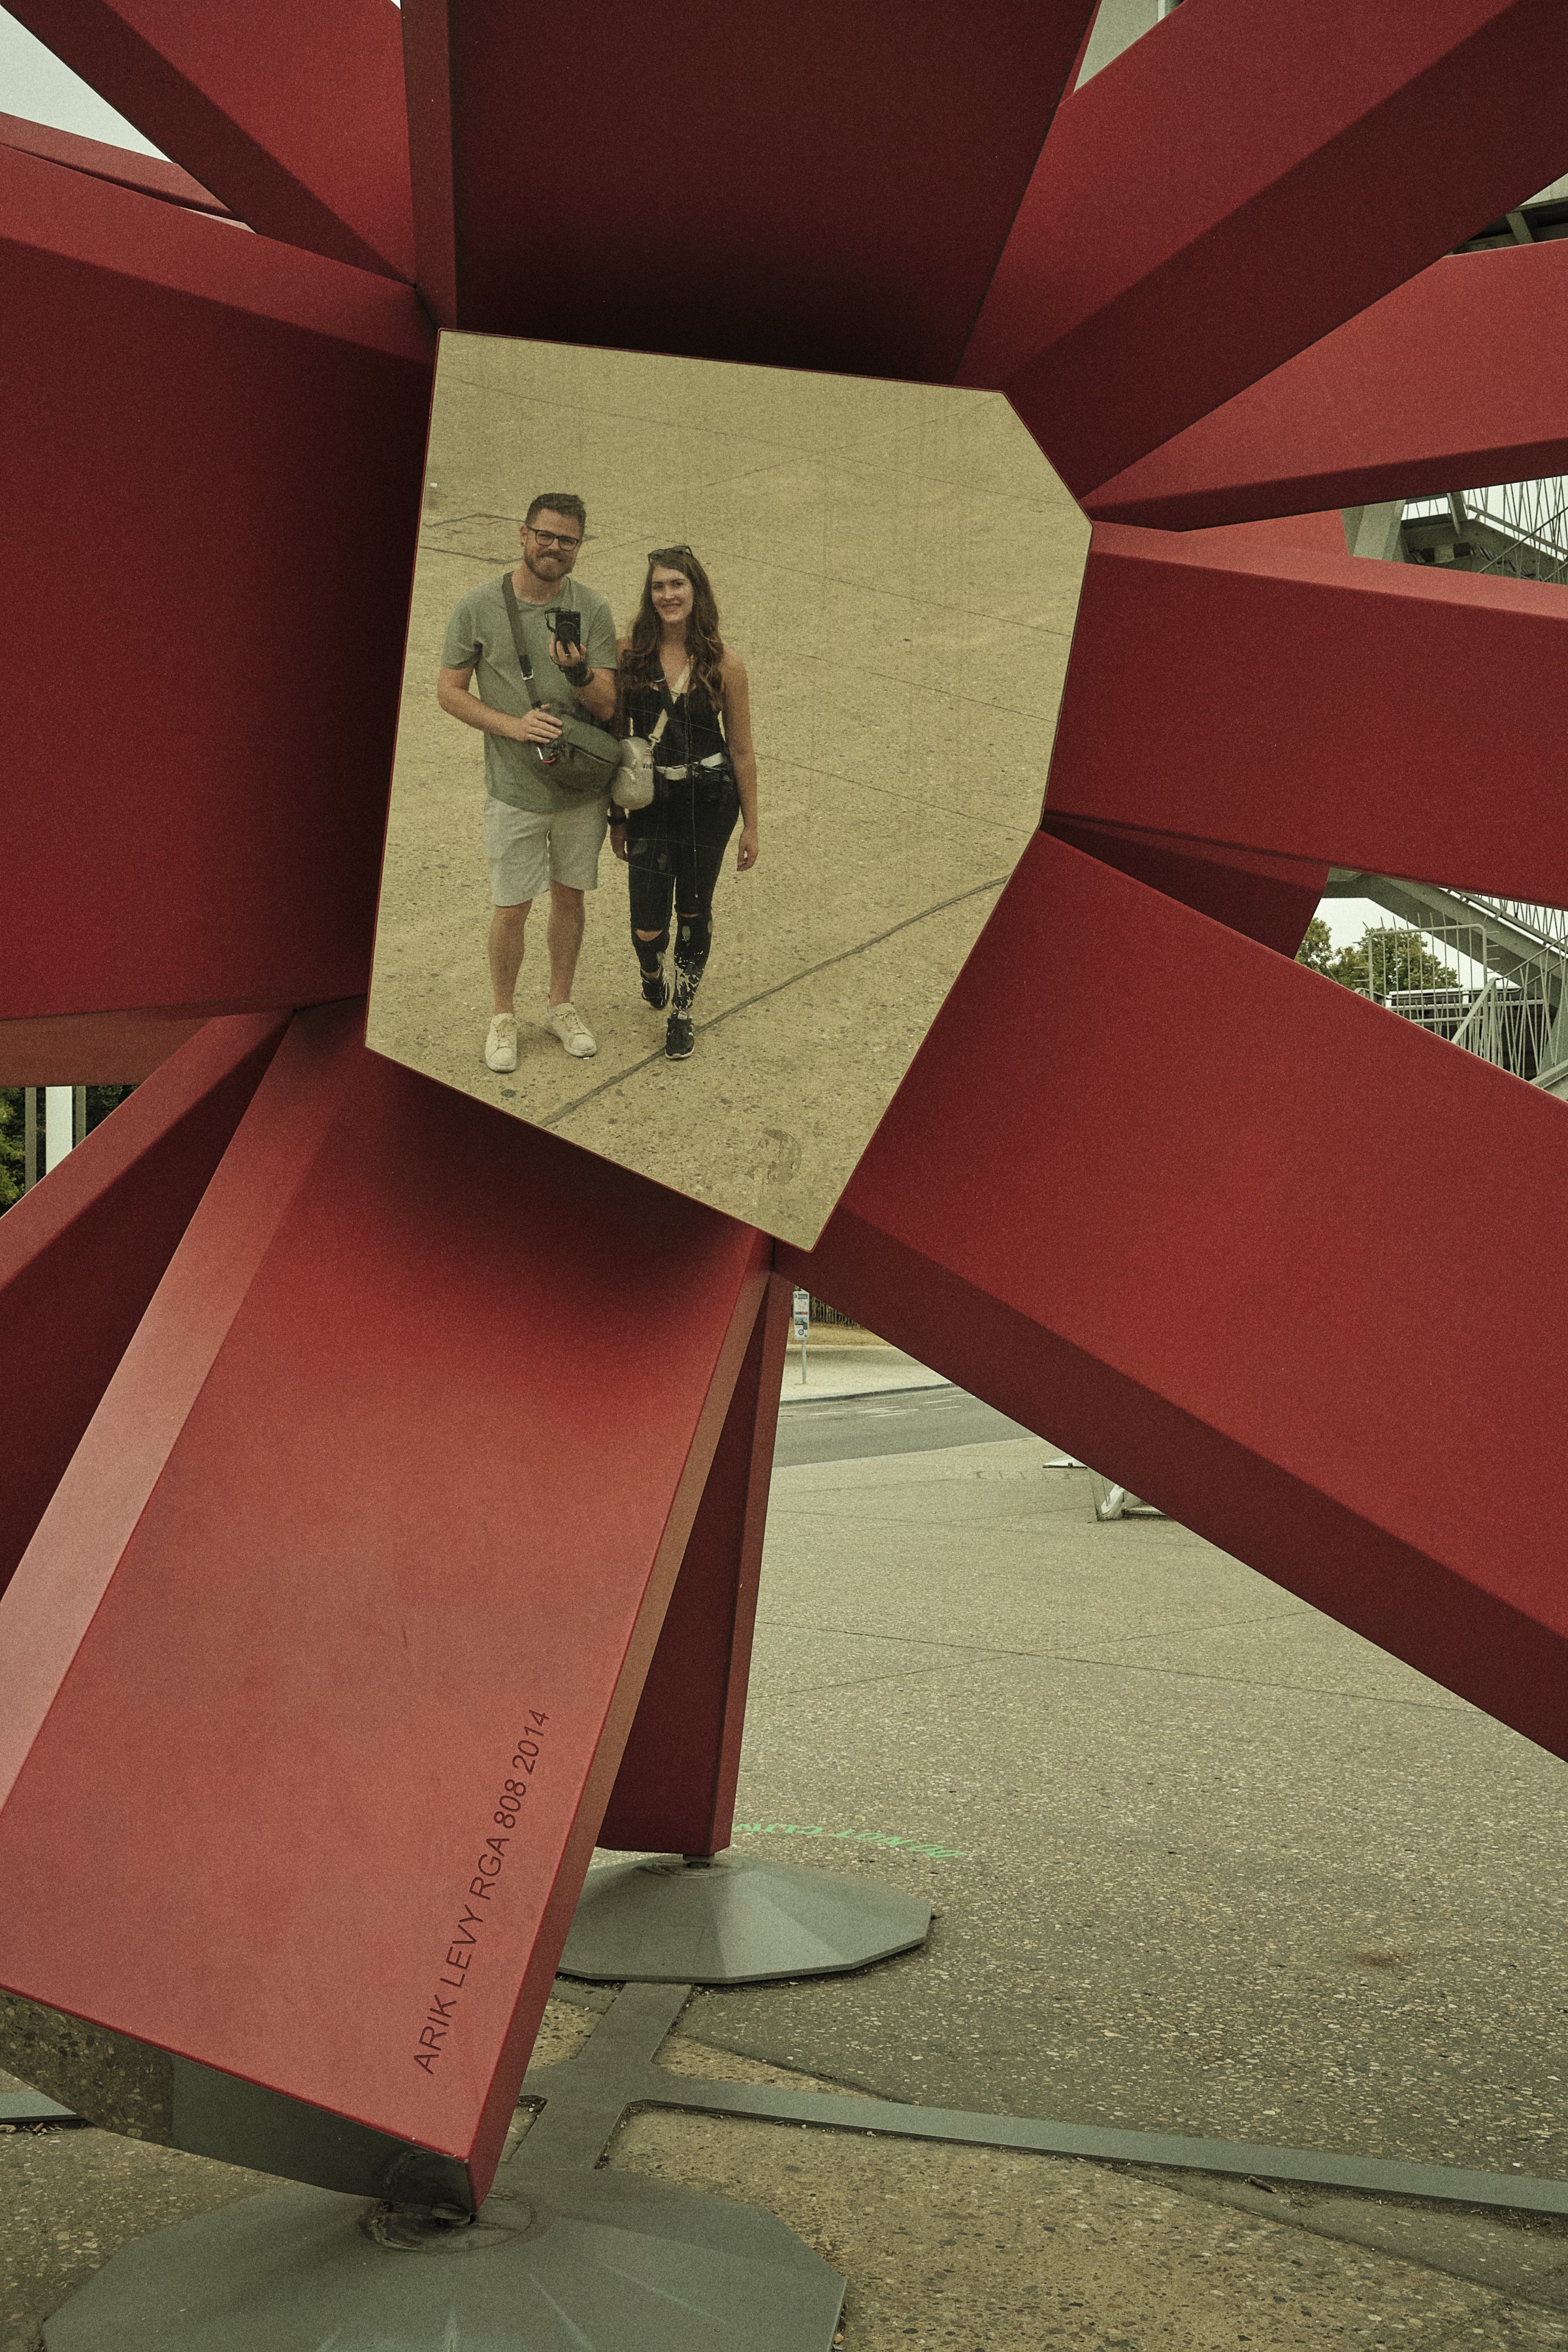 Exploring Together: Connor and Krysta's Reflective Moment at the Atomium